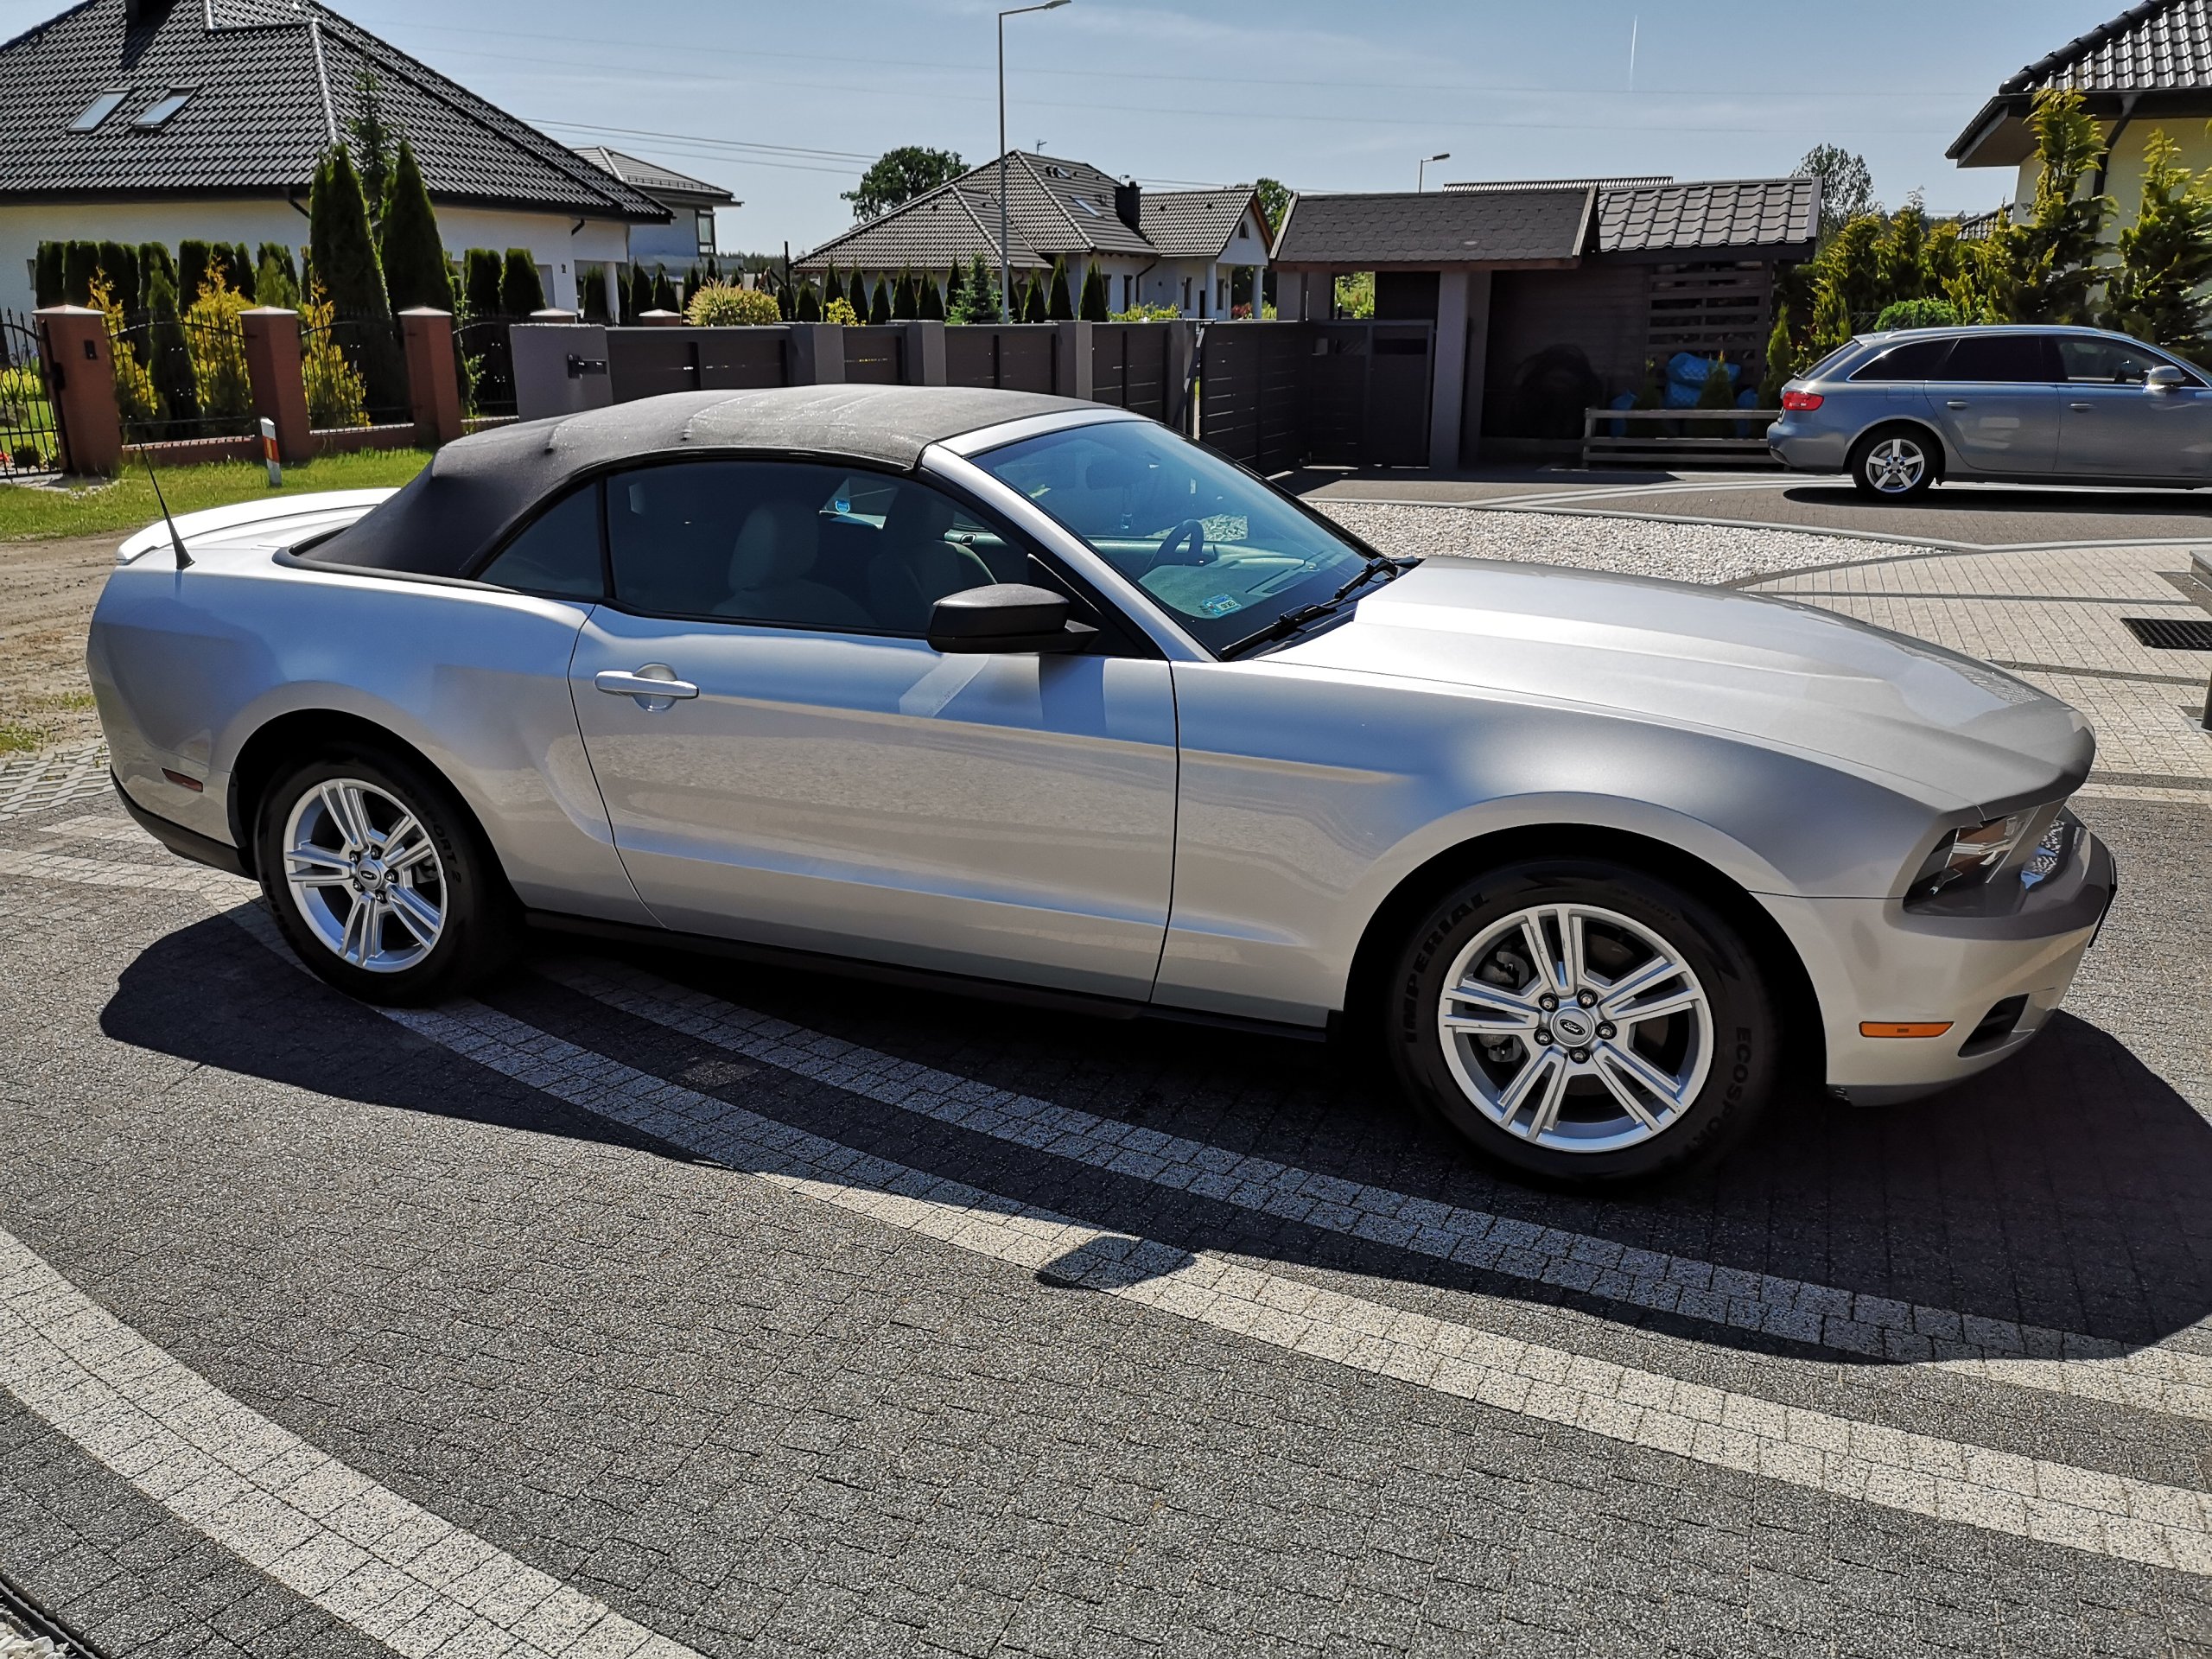 FORD MUSTANG 3.7 V6 305KM Convertible 2012 7827331266